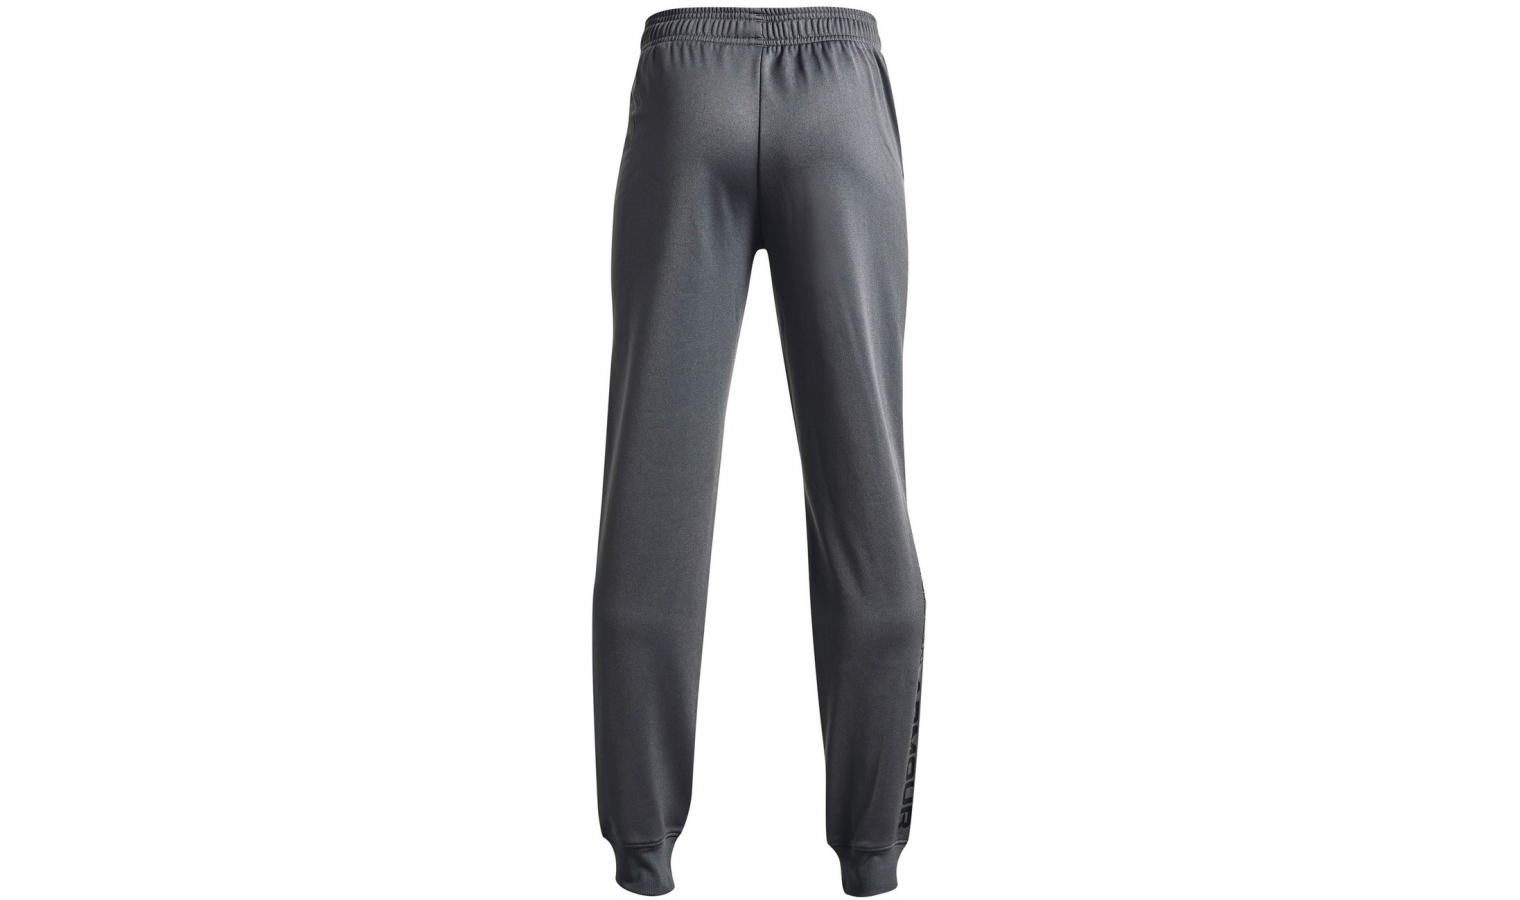 Under Armour Brawler 2.0 Tapered Pants - Boys | Altitude Sports